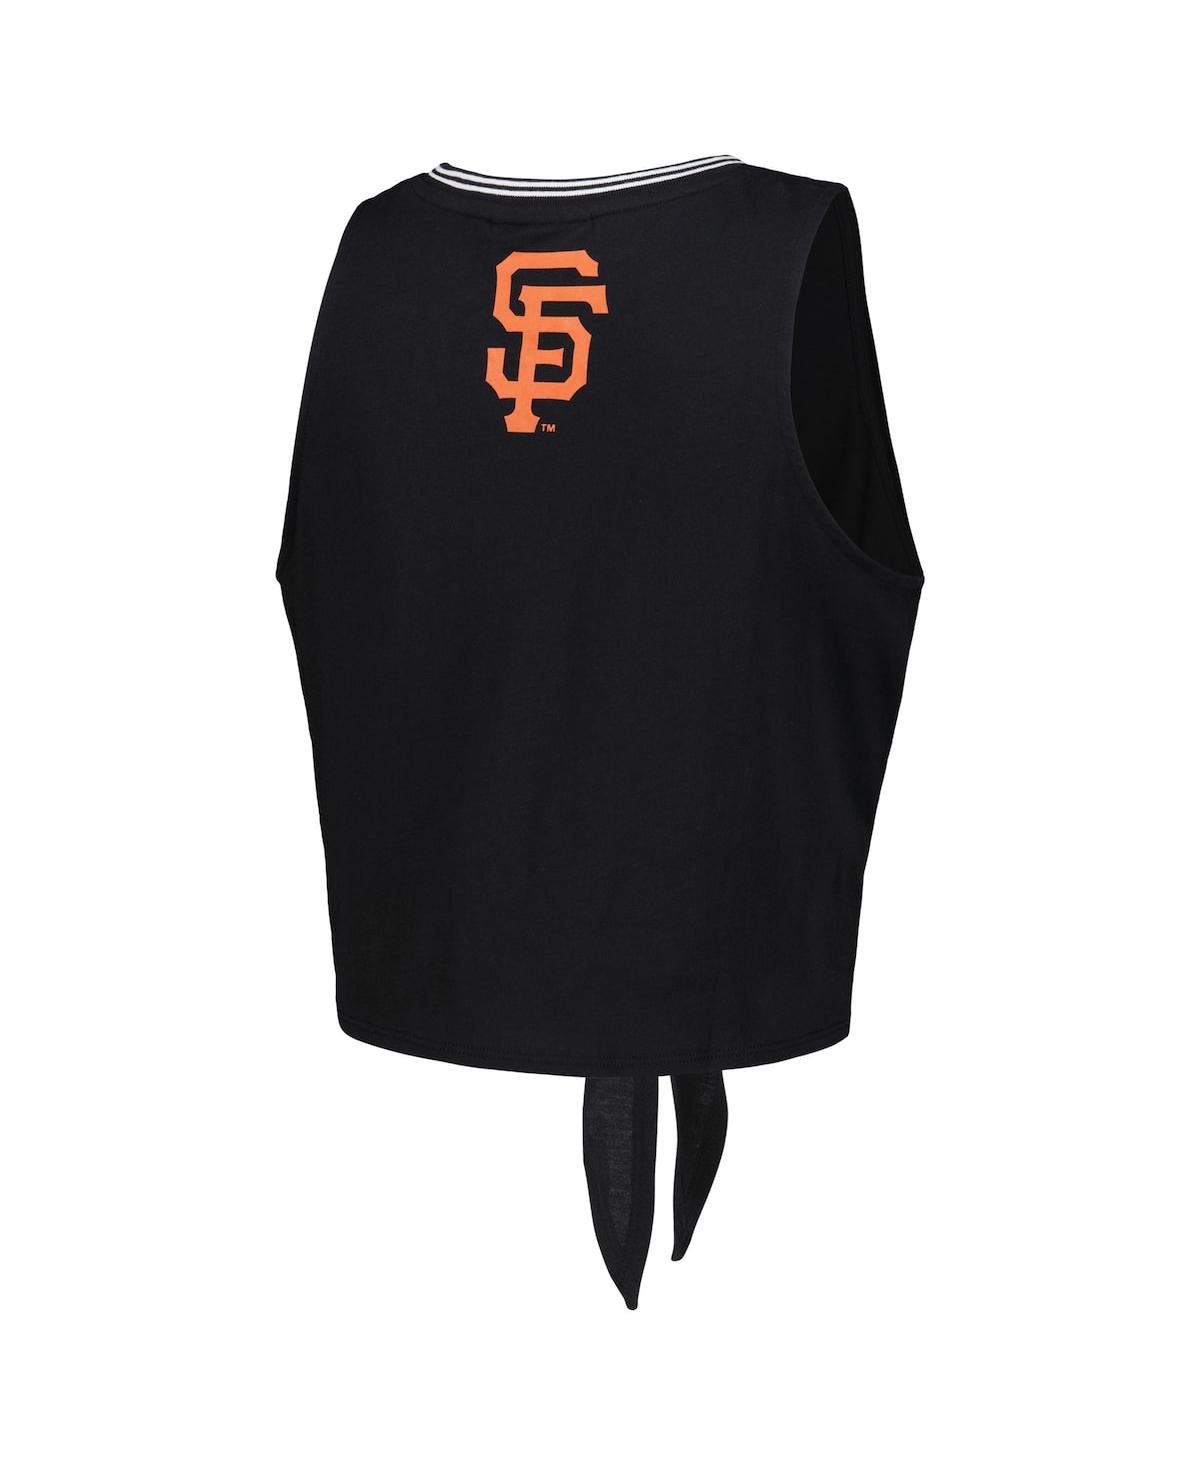 Shop The Wild Collective Women's  Black San Francisco Giants Twisted Tie Front Tank Top